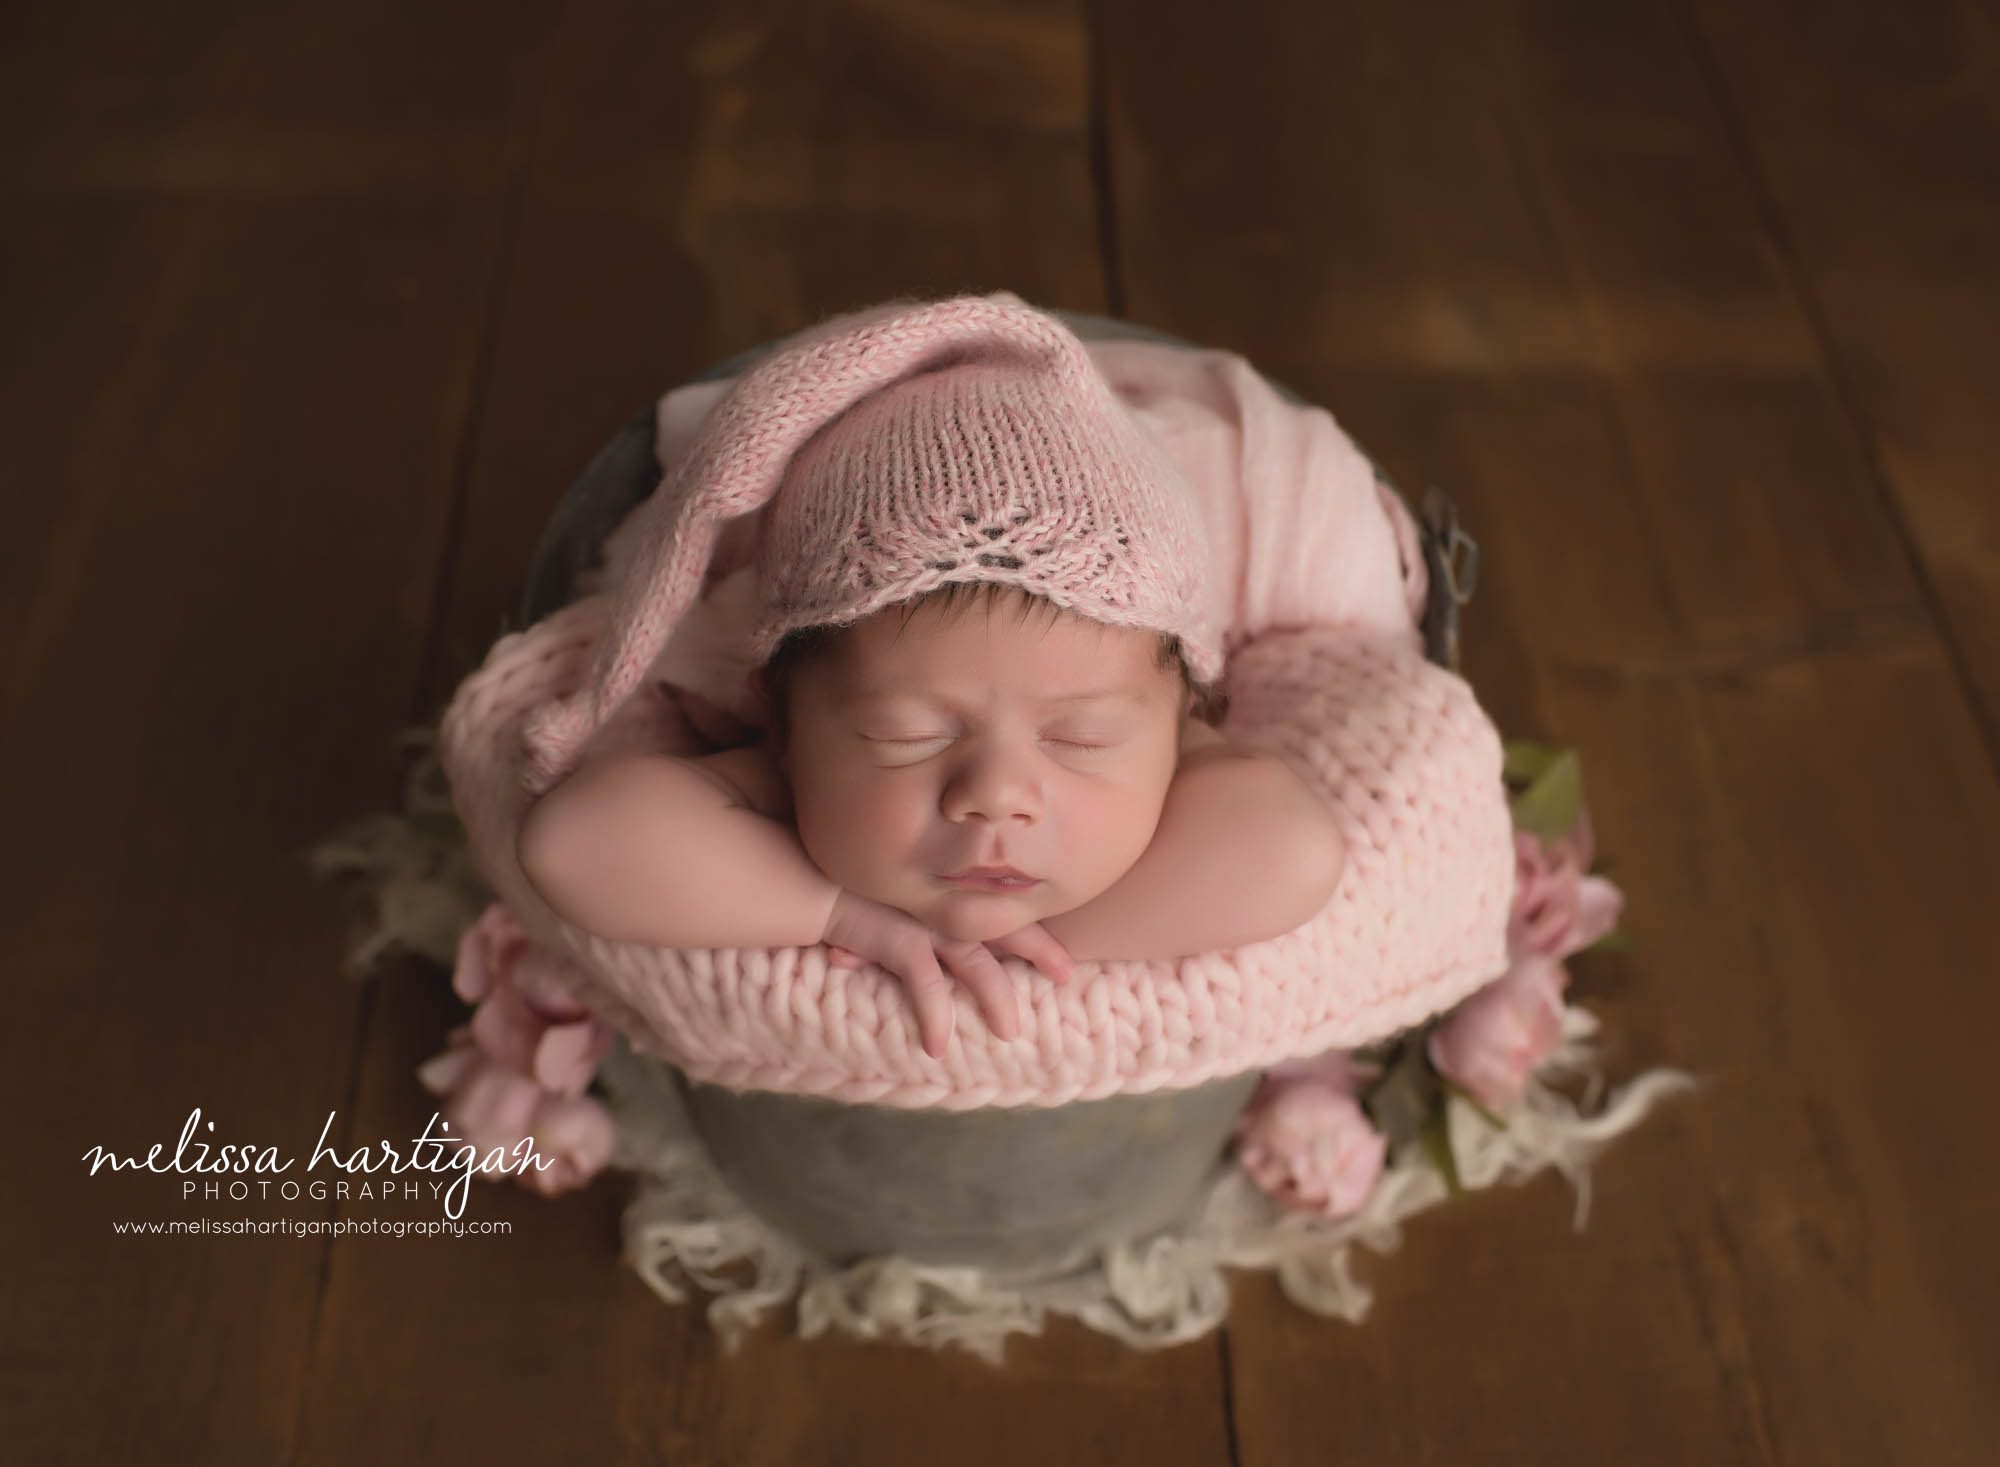 newborn baby girl posed in bucket wearing knitted sleepy cap in light pink rose color